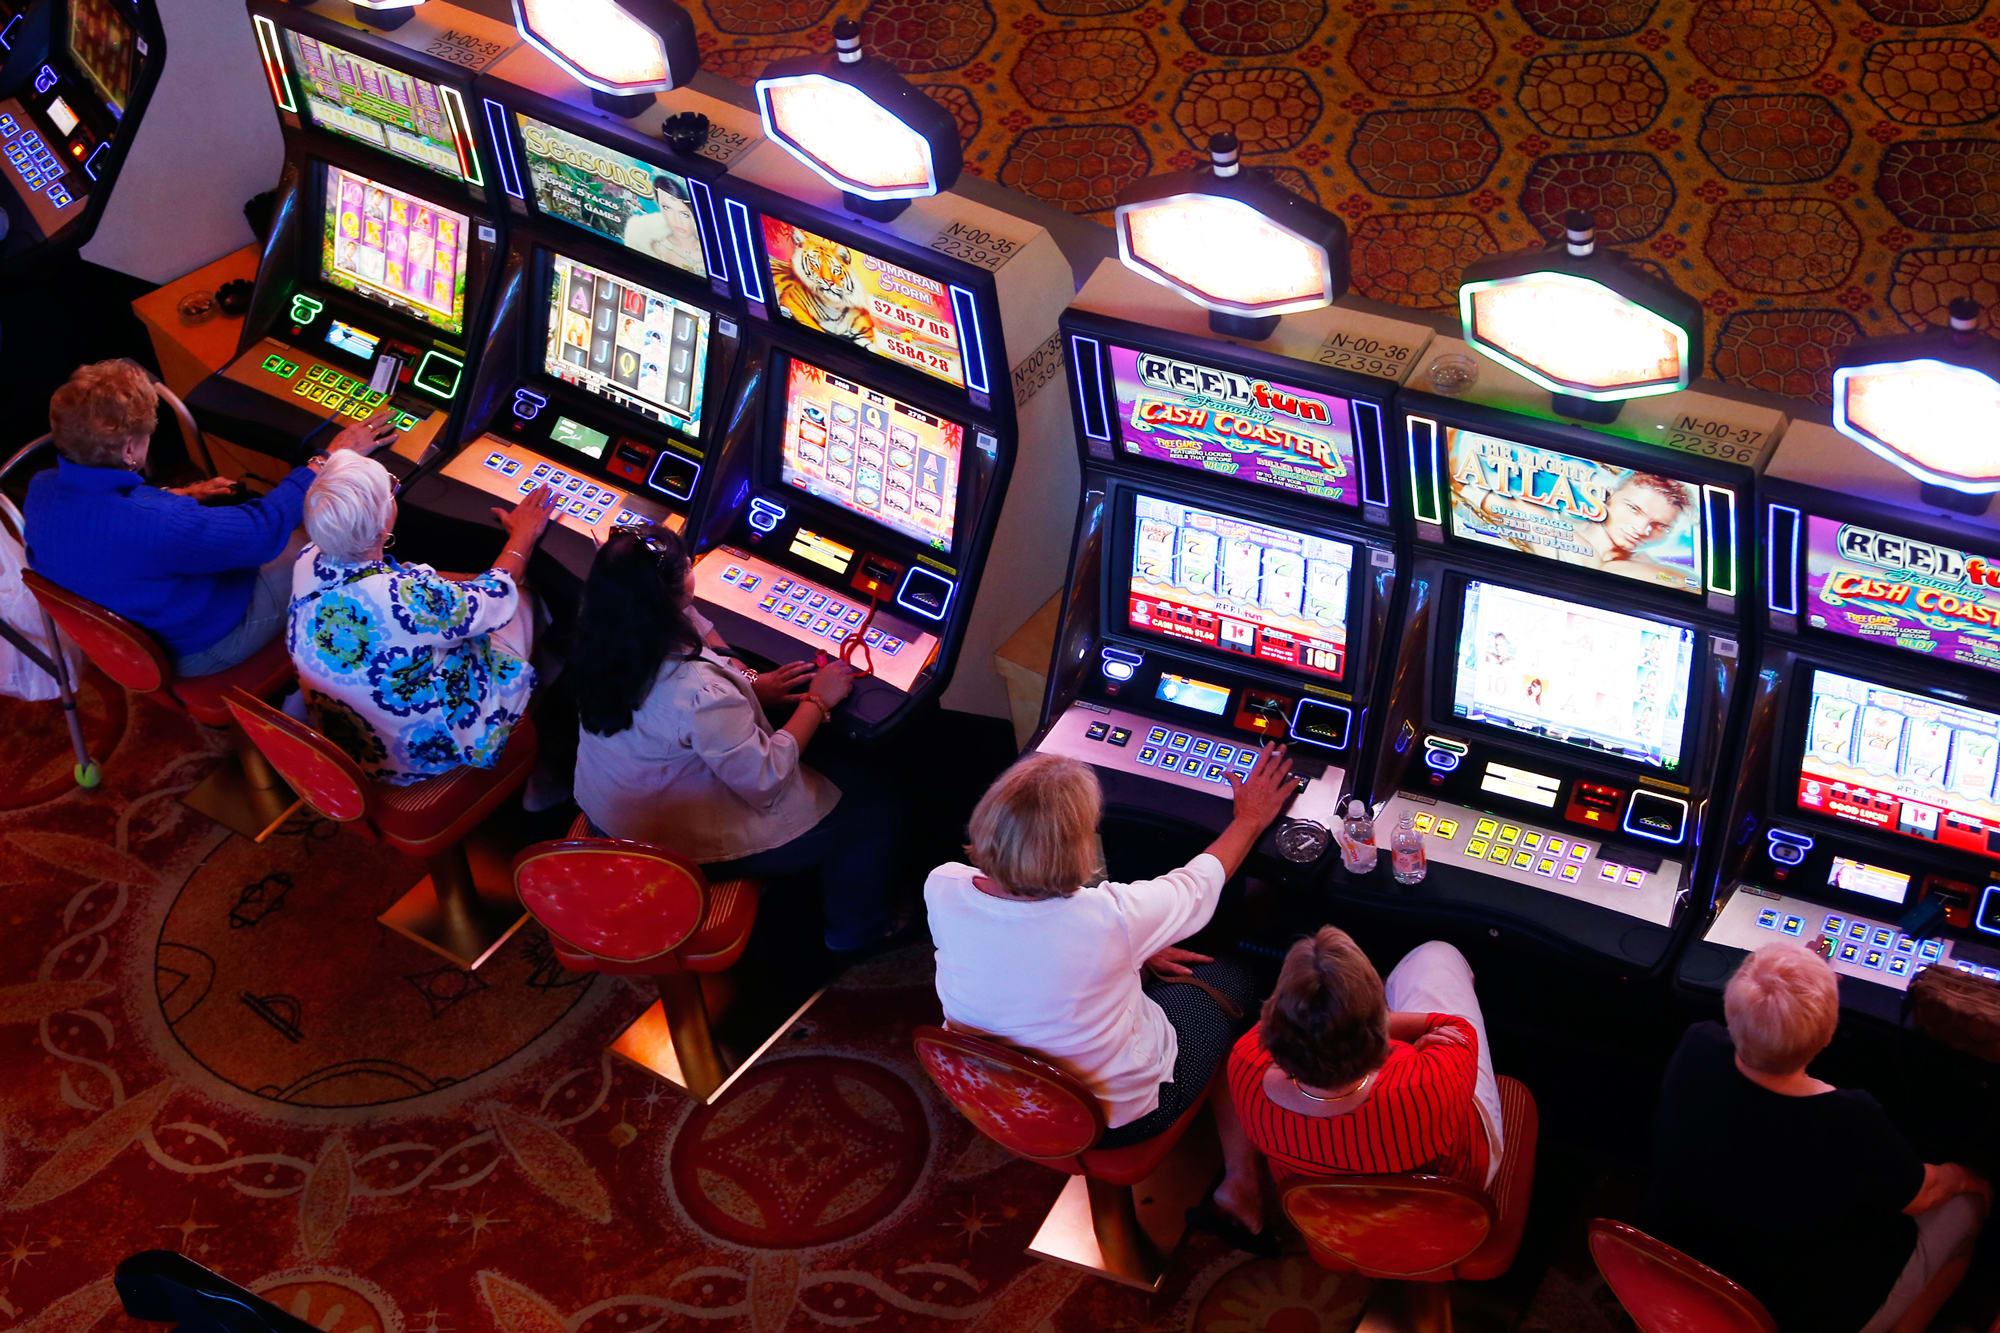 Check out The Incredible Advantages Of The Online Casinos Here!